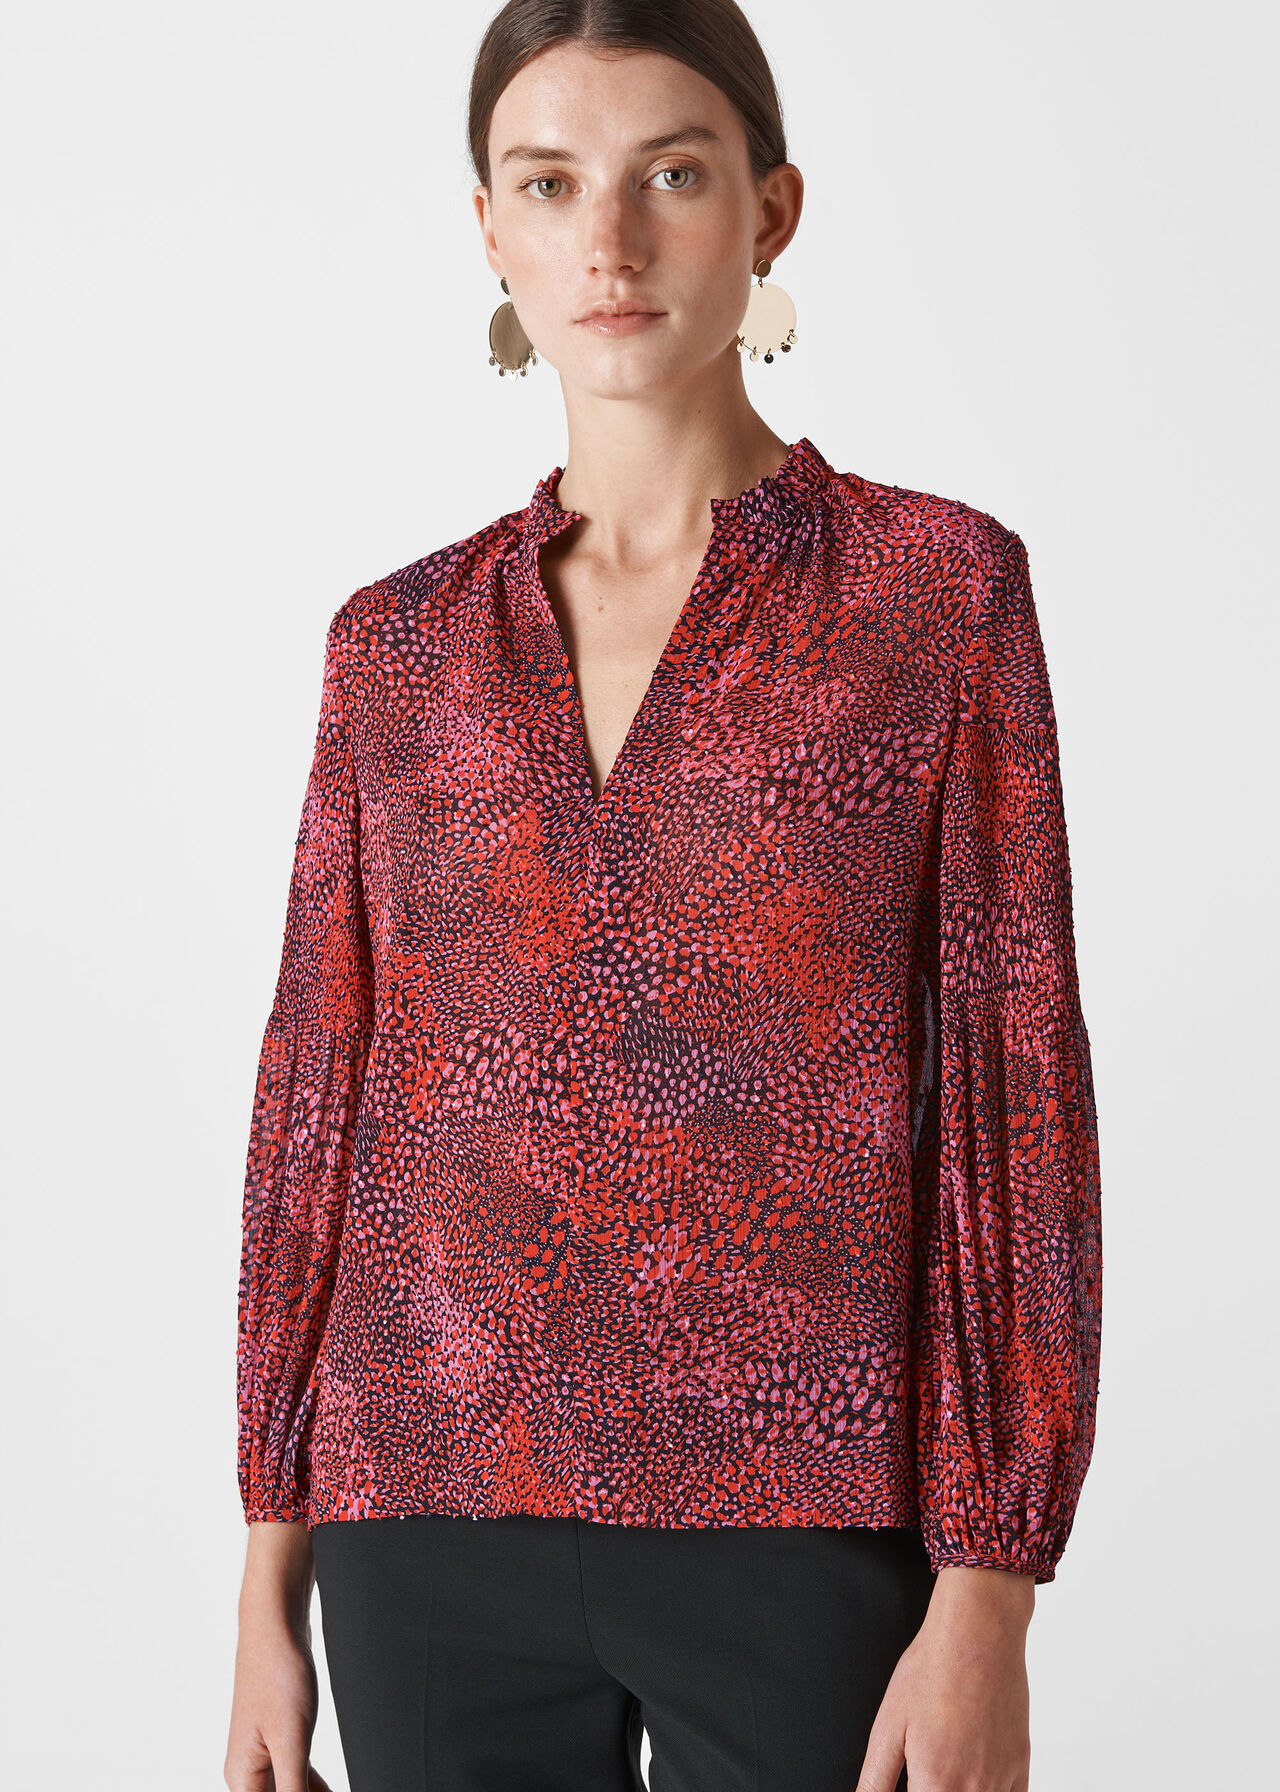 Abstract Animal Print Blouse Pink/Multi